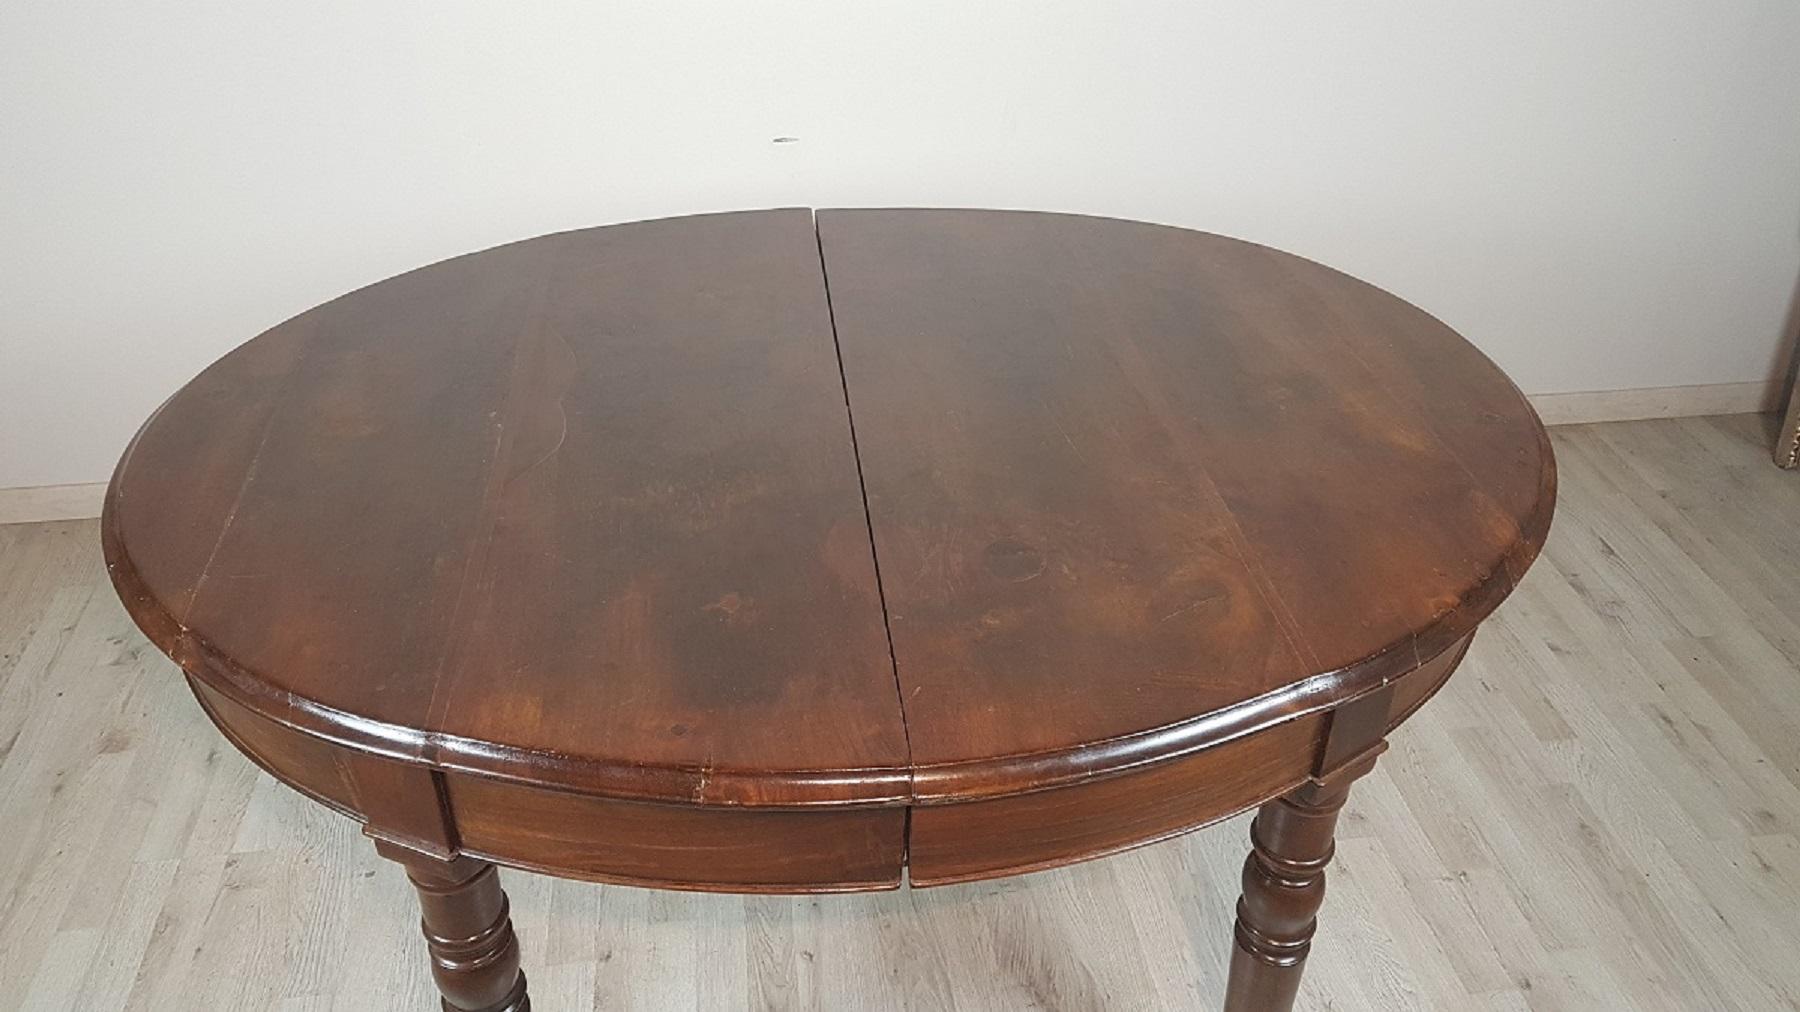 Early 19th Century 19th Century Italian Charles X Walnut Wood Oval Extendable Dining Room Table